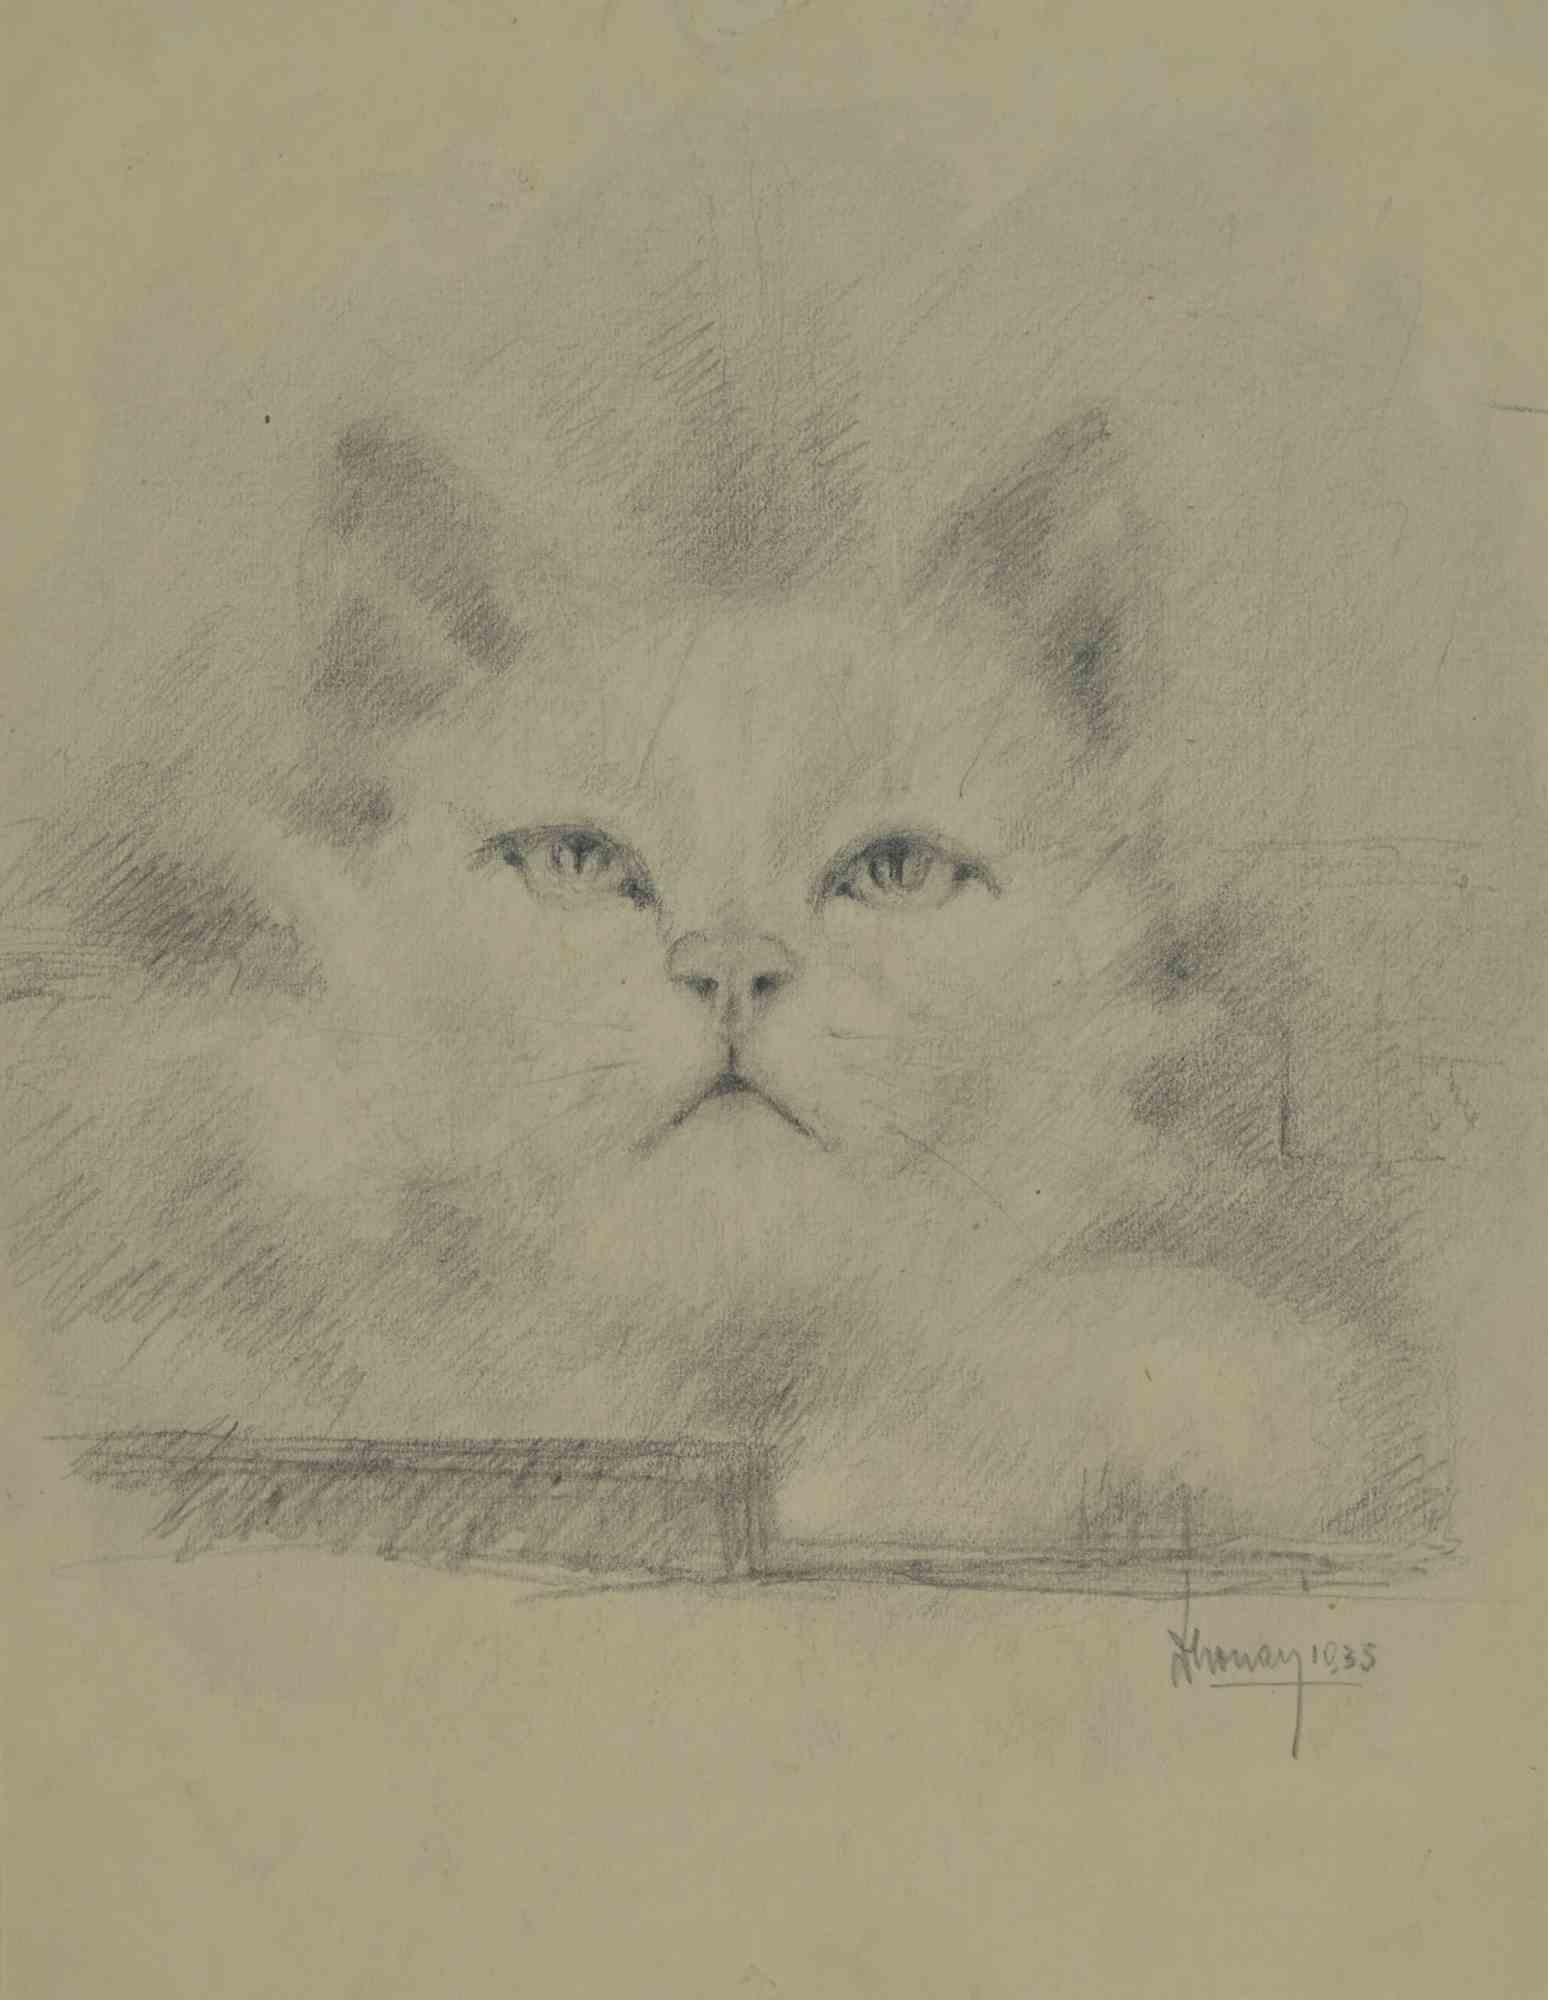 The Kitten is a Drawing in pencil realized by Augusto Monari in the Early-20th Century.

Hand-signed on the lower.

Good conditions, including a creamy-colored Passepartout.

The artwork is depicted through confident strokes in a well-balanced